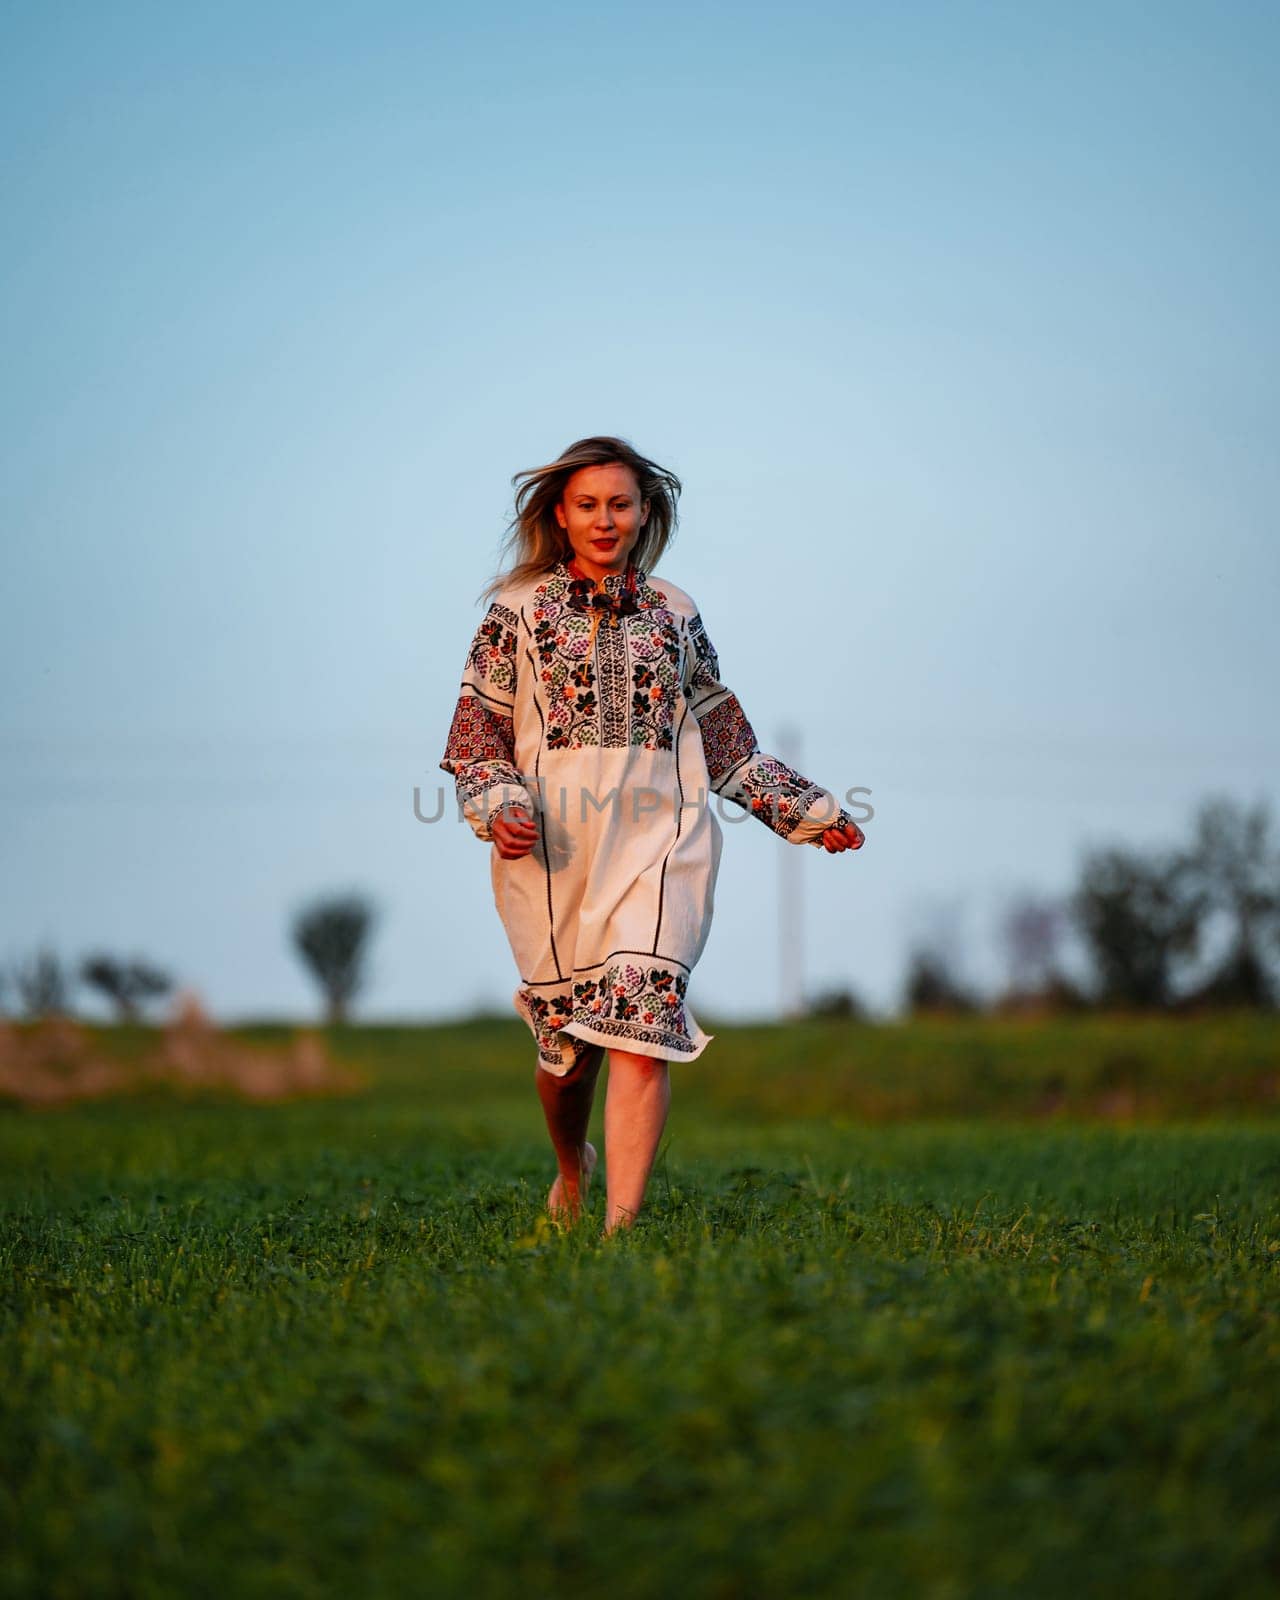 Embroidered and unique petticoat, a girl walks barefoot in the field in an embroidered shirt. by Niko_Cingaryuk